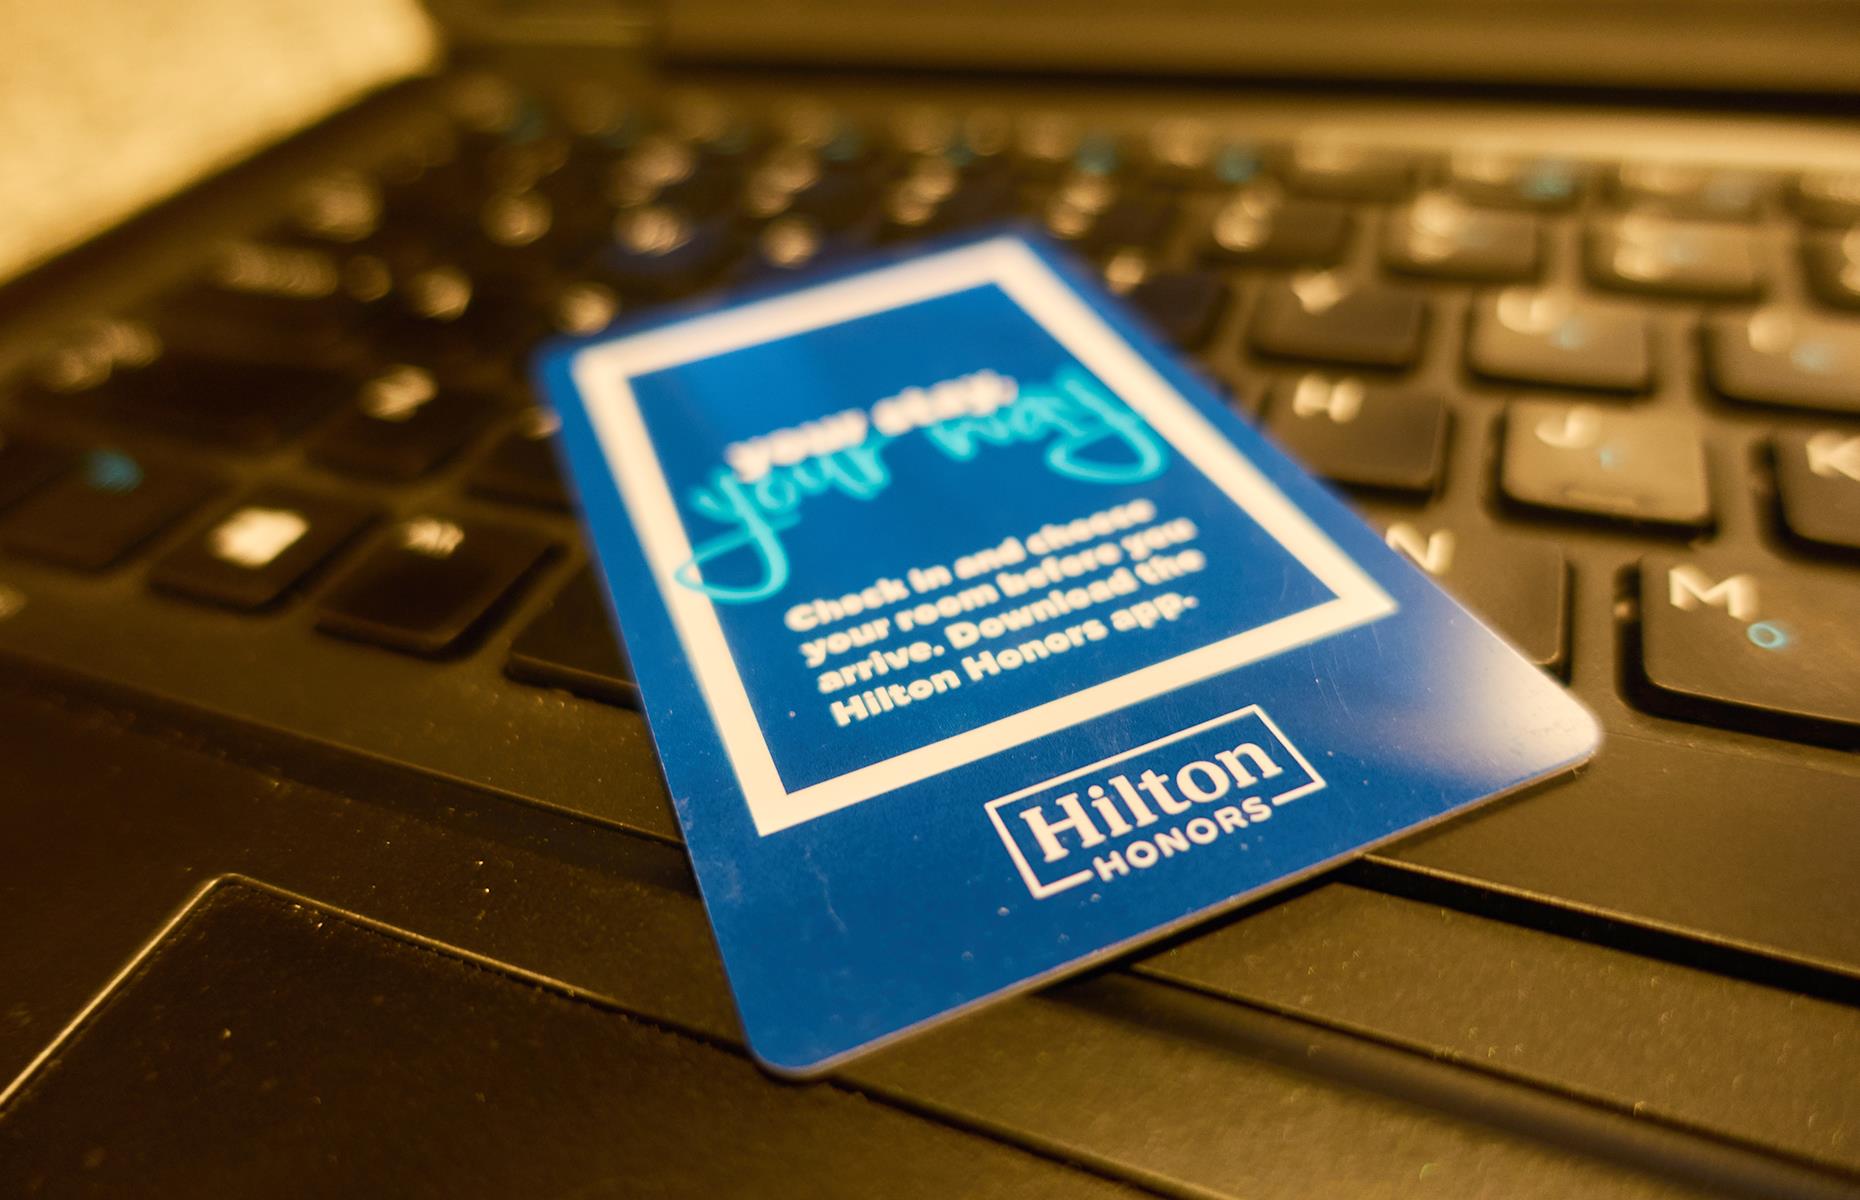 <p>Hilton's digital offering is top notch and its hi-tech amenities are centered around the Hilton Honors app. Using the app, guests can now not only check in online, but <a href="https://hoteltechreport.com/news/hilton-digital-check-in">choose their very own hotel room</a>, just like you would an airplane seat. Once you've entered your arrival time, you can peruse a floor plan and select your chosen location. When your trip's up, you can check out digitally too. </p>